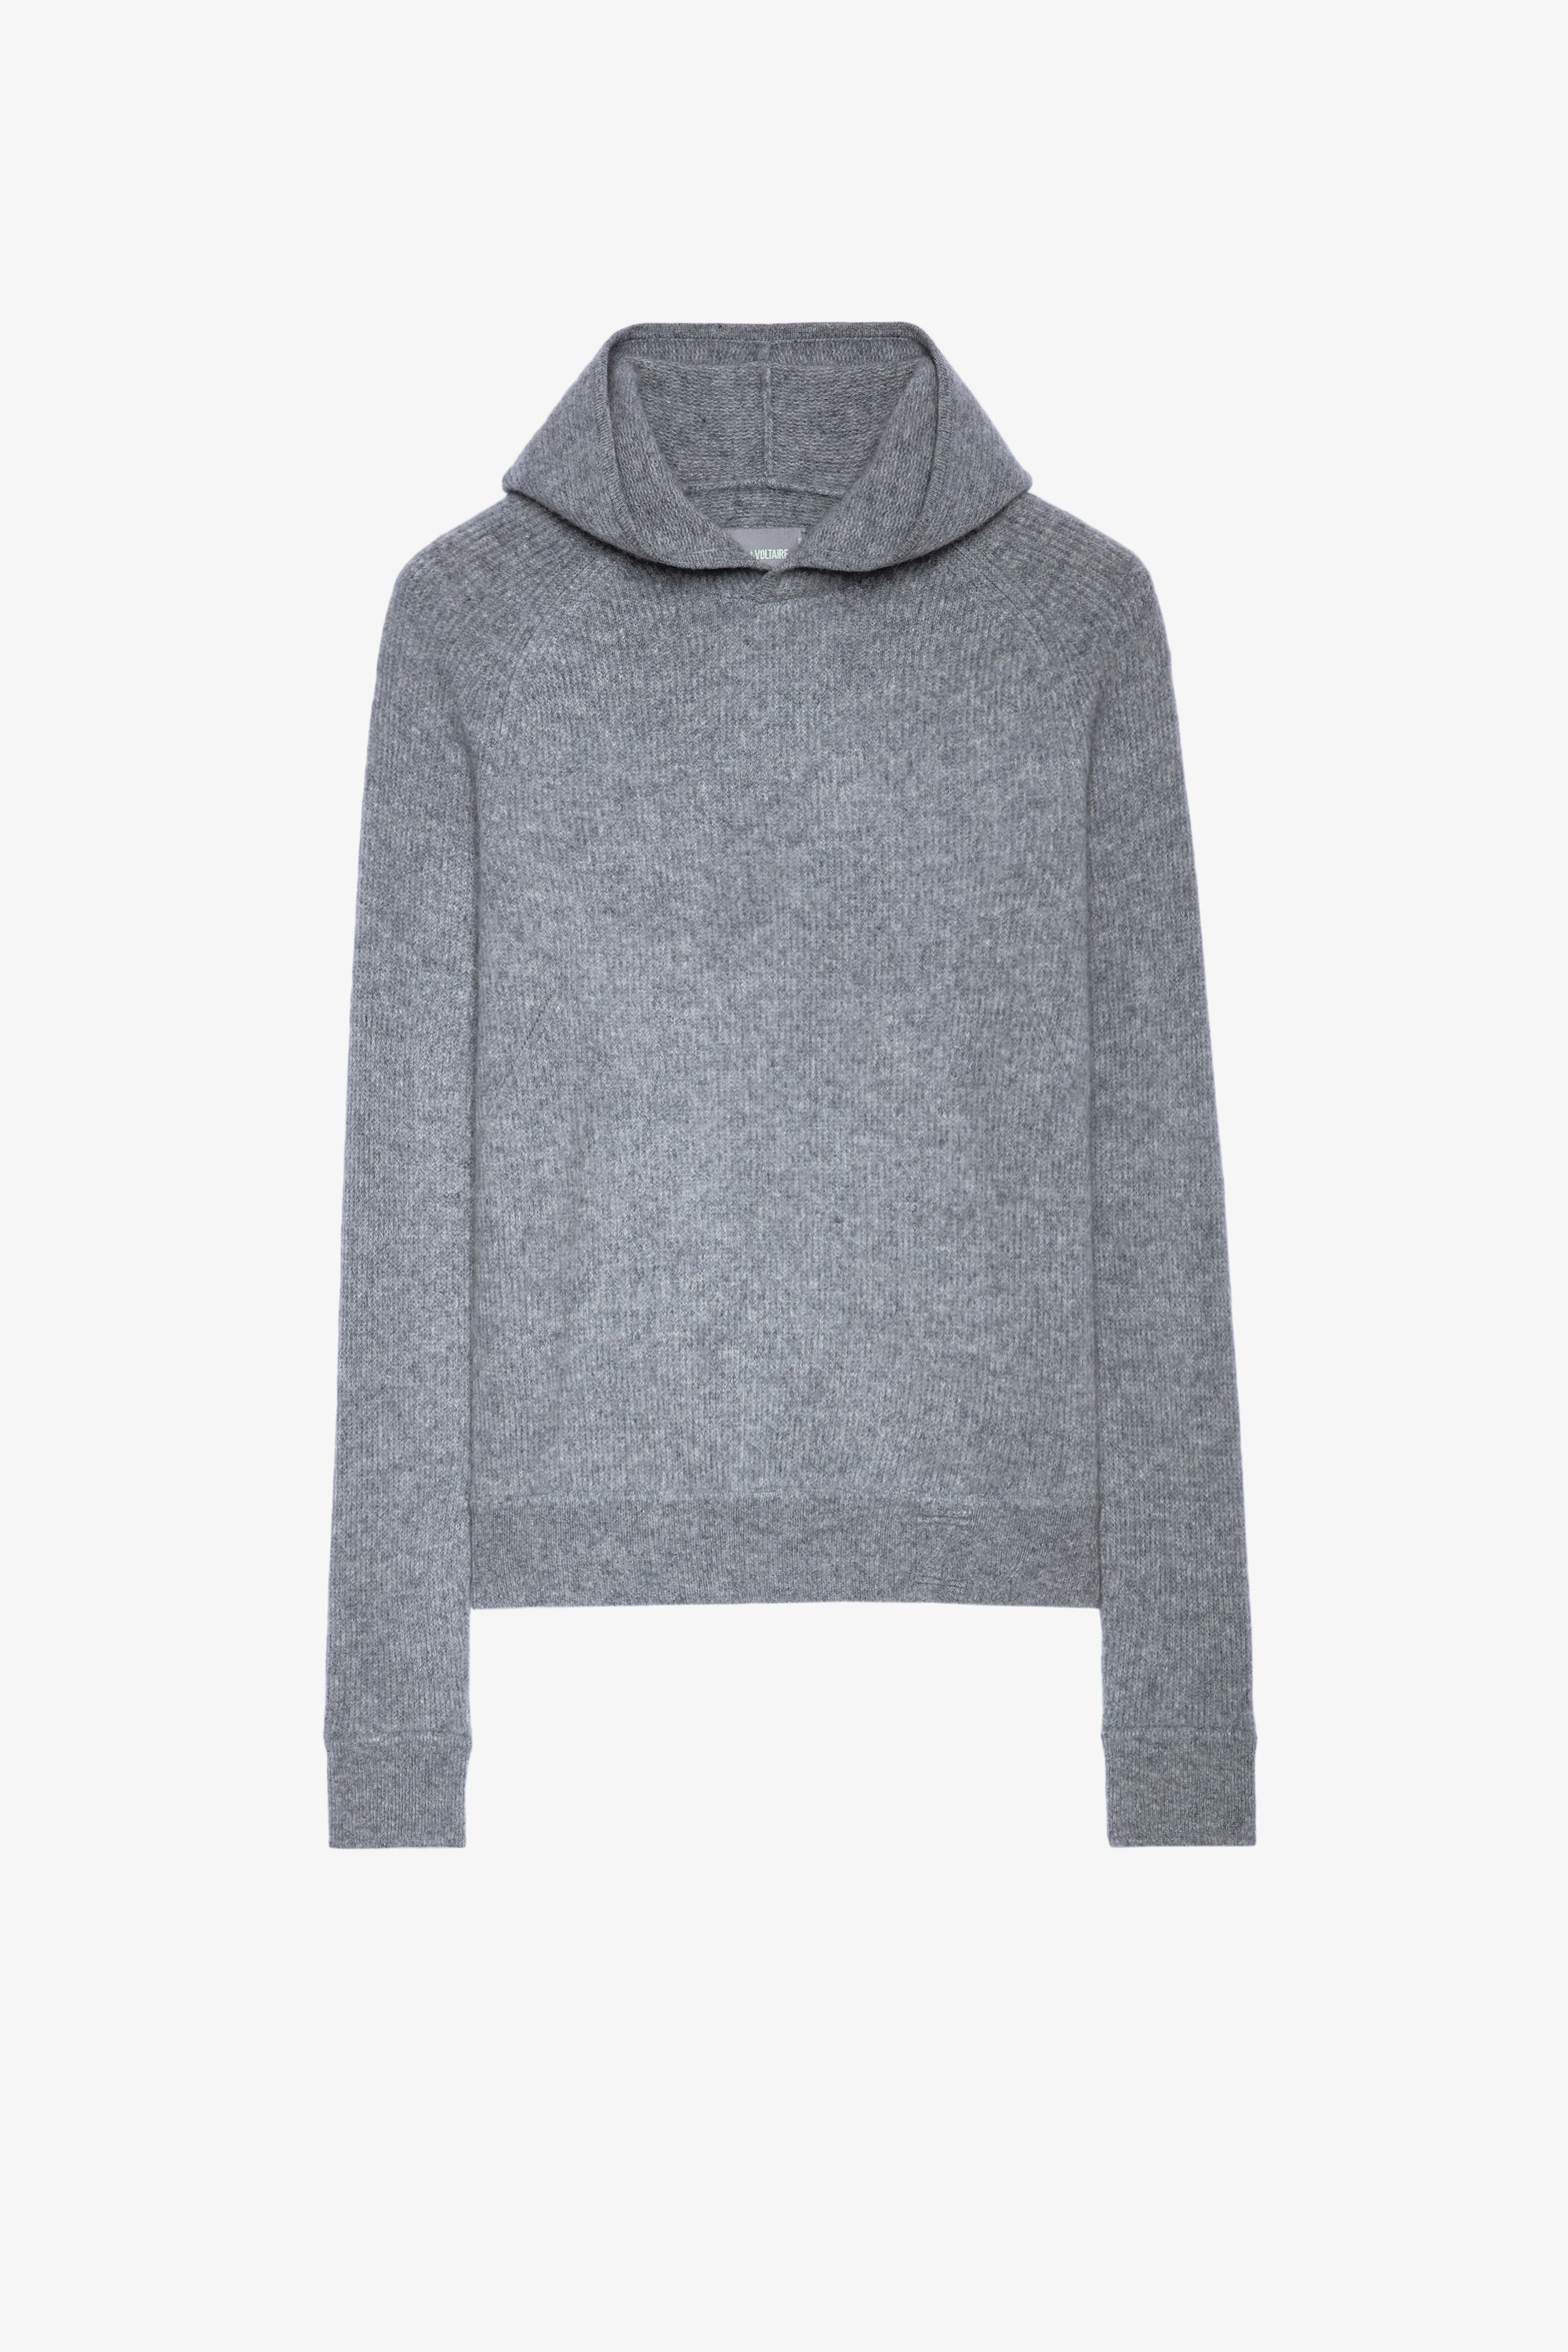 Moony Sweater Cashmere Women's gray cashmere hoodie